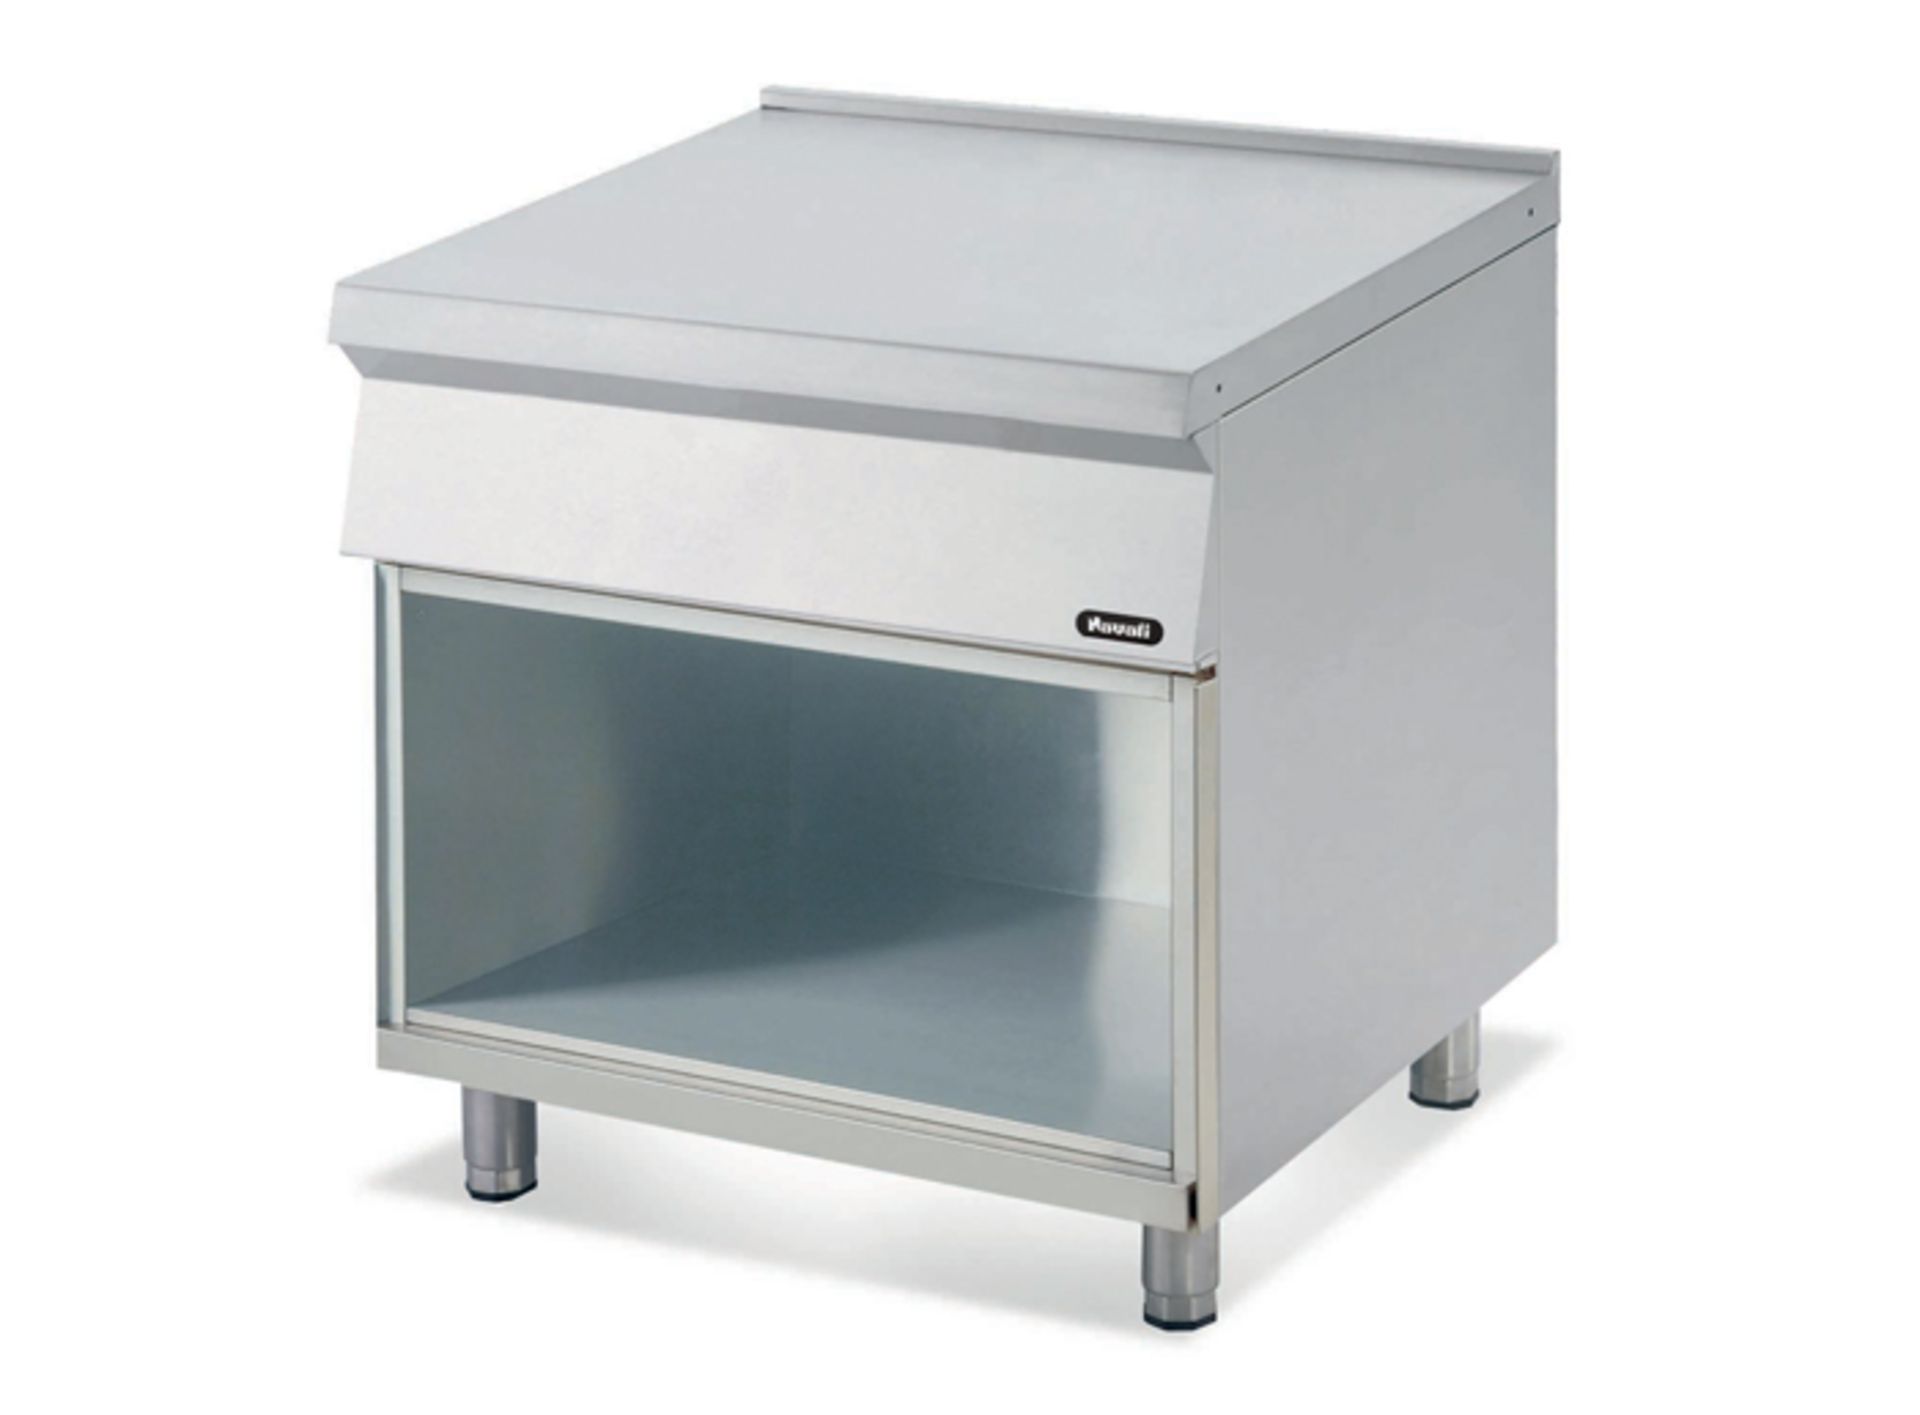 * NNWC 4-75 MR Nayati Meritus Stainless Steel Preparation Table with Open Cabinet Under (400 x 750 x